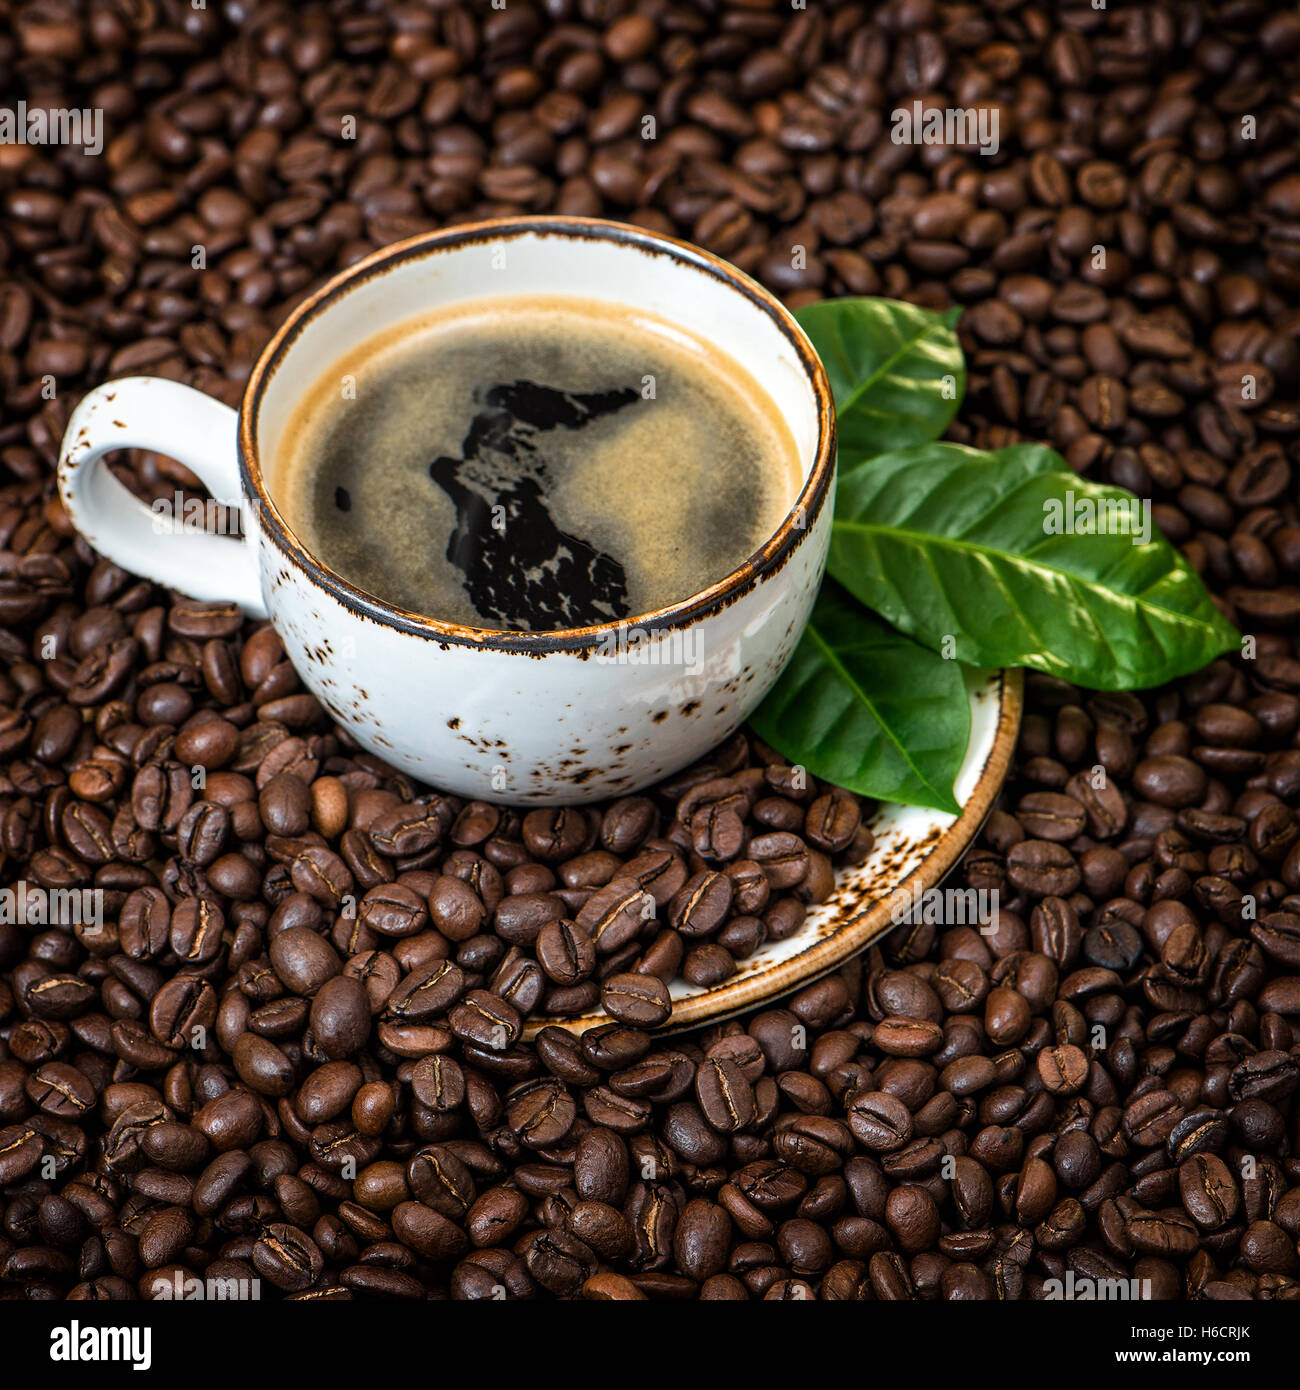 Black coffee with green leaves on caffee beans background. Vintage style toned picture Stock Photo